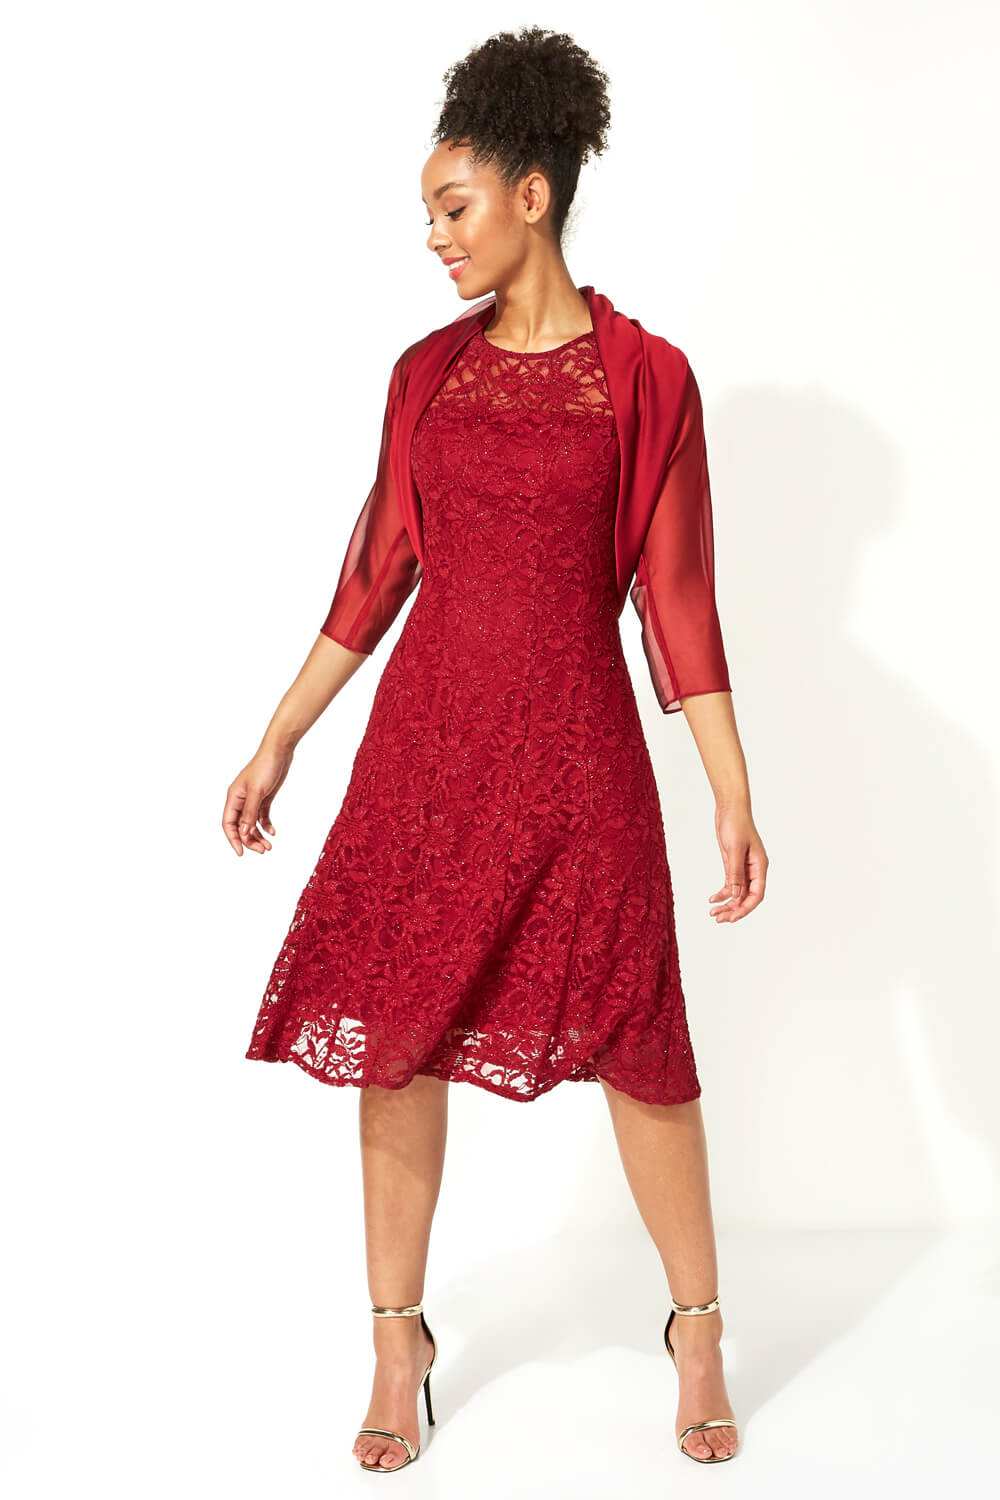 Red Glitter Lace Fit and Flare Dress , Image 4 of 5